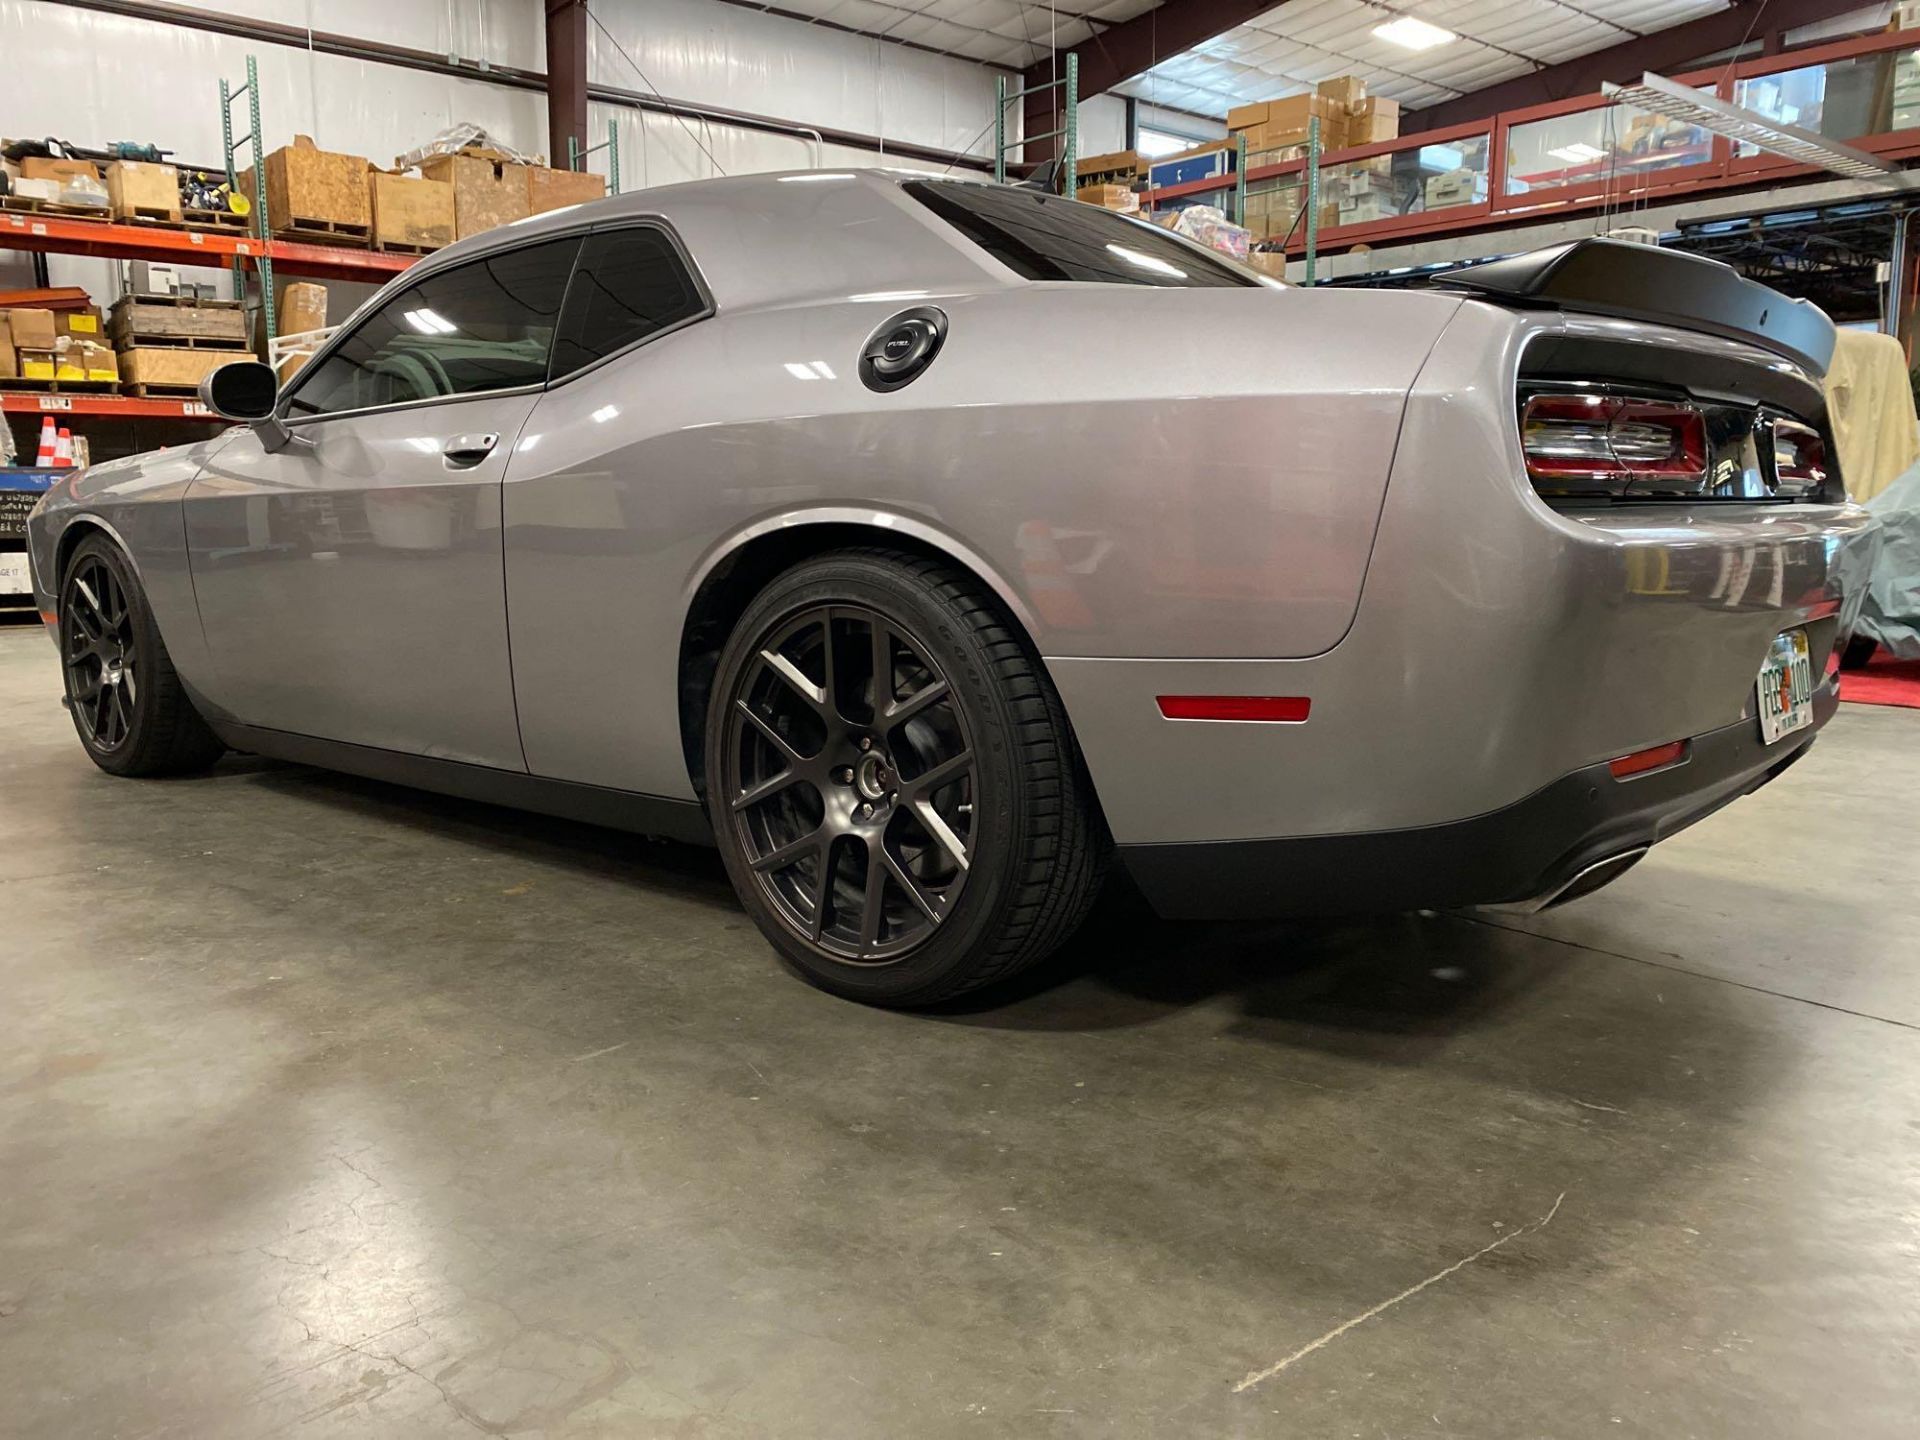 2016 DODGE CHALLENGER WITH SCAT PACK/ SHAKER PACKAGE, APPROX 9,850 MILES SHOWING, RUNS AND OPERATES - Image 7 of 26